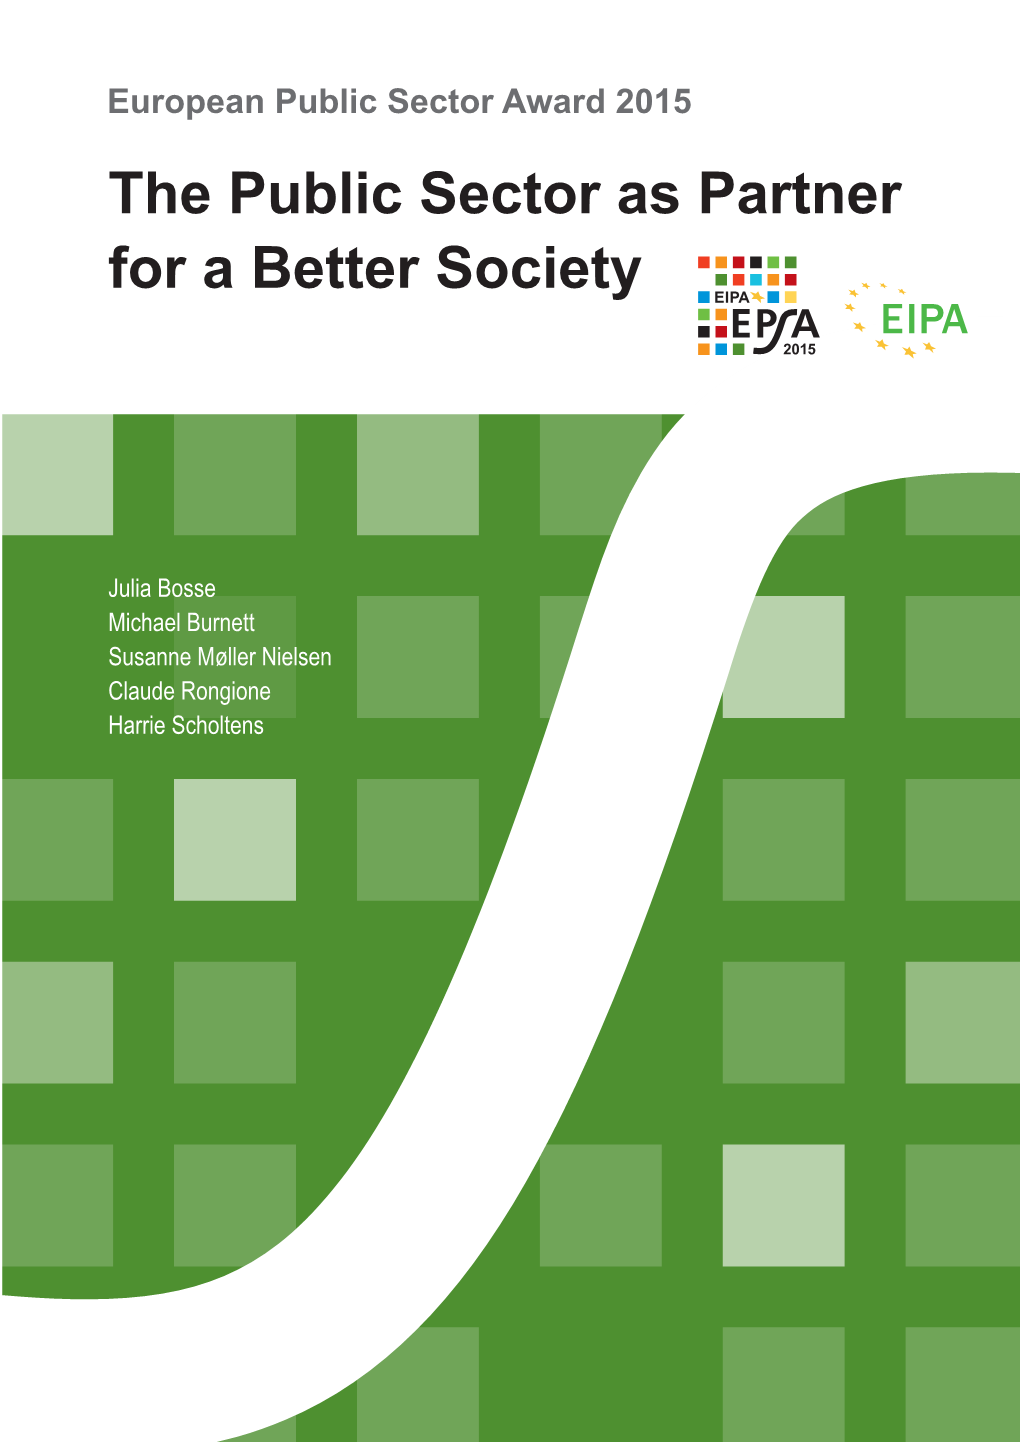 The Public Sector As Partner for a Better Society